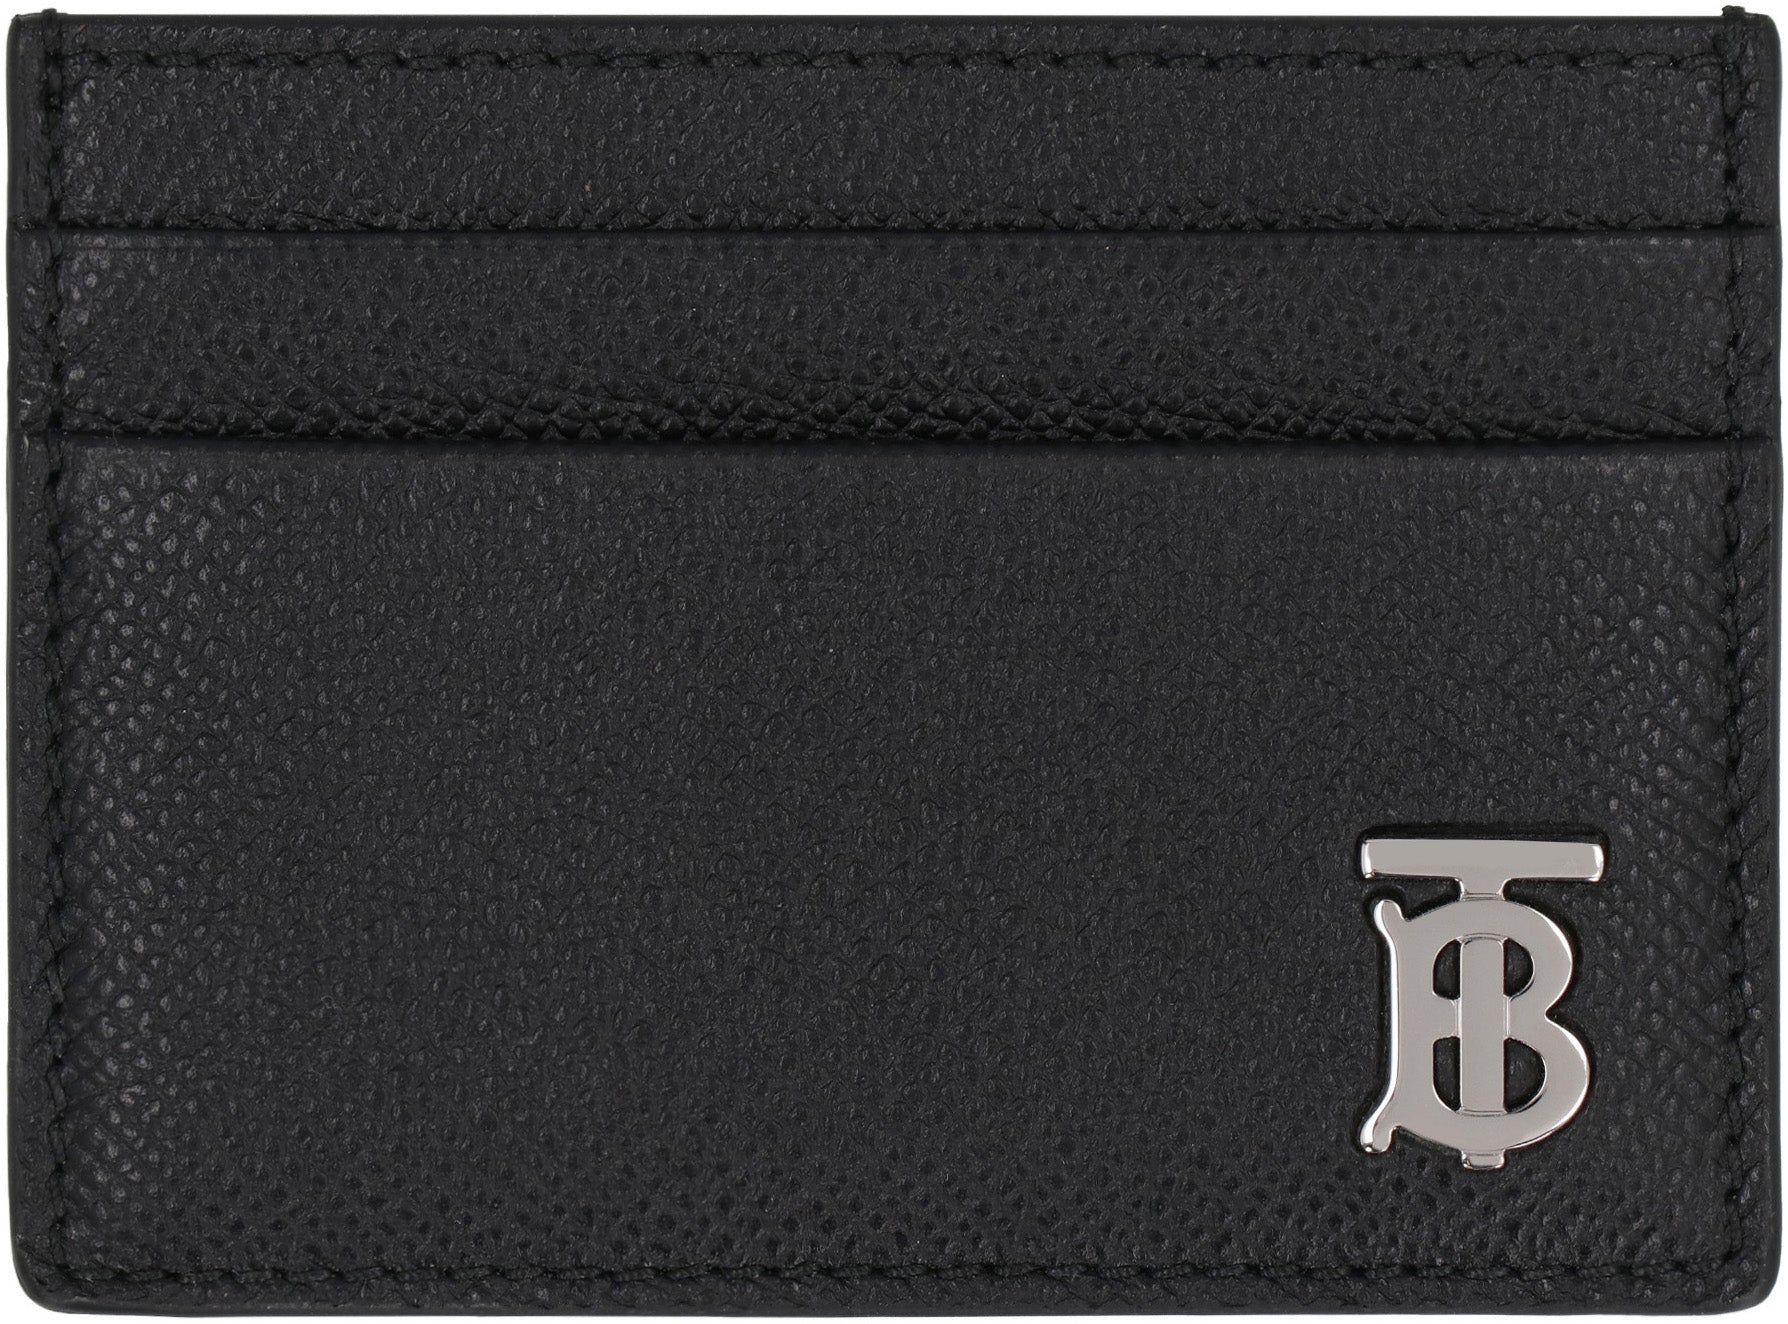 Burberry Chase Card Case in Metallic